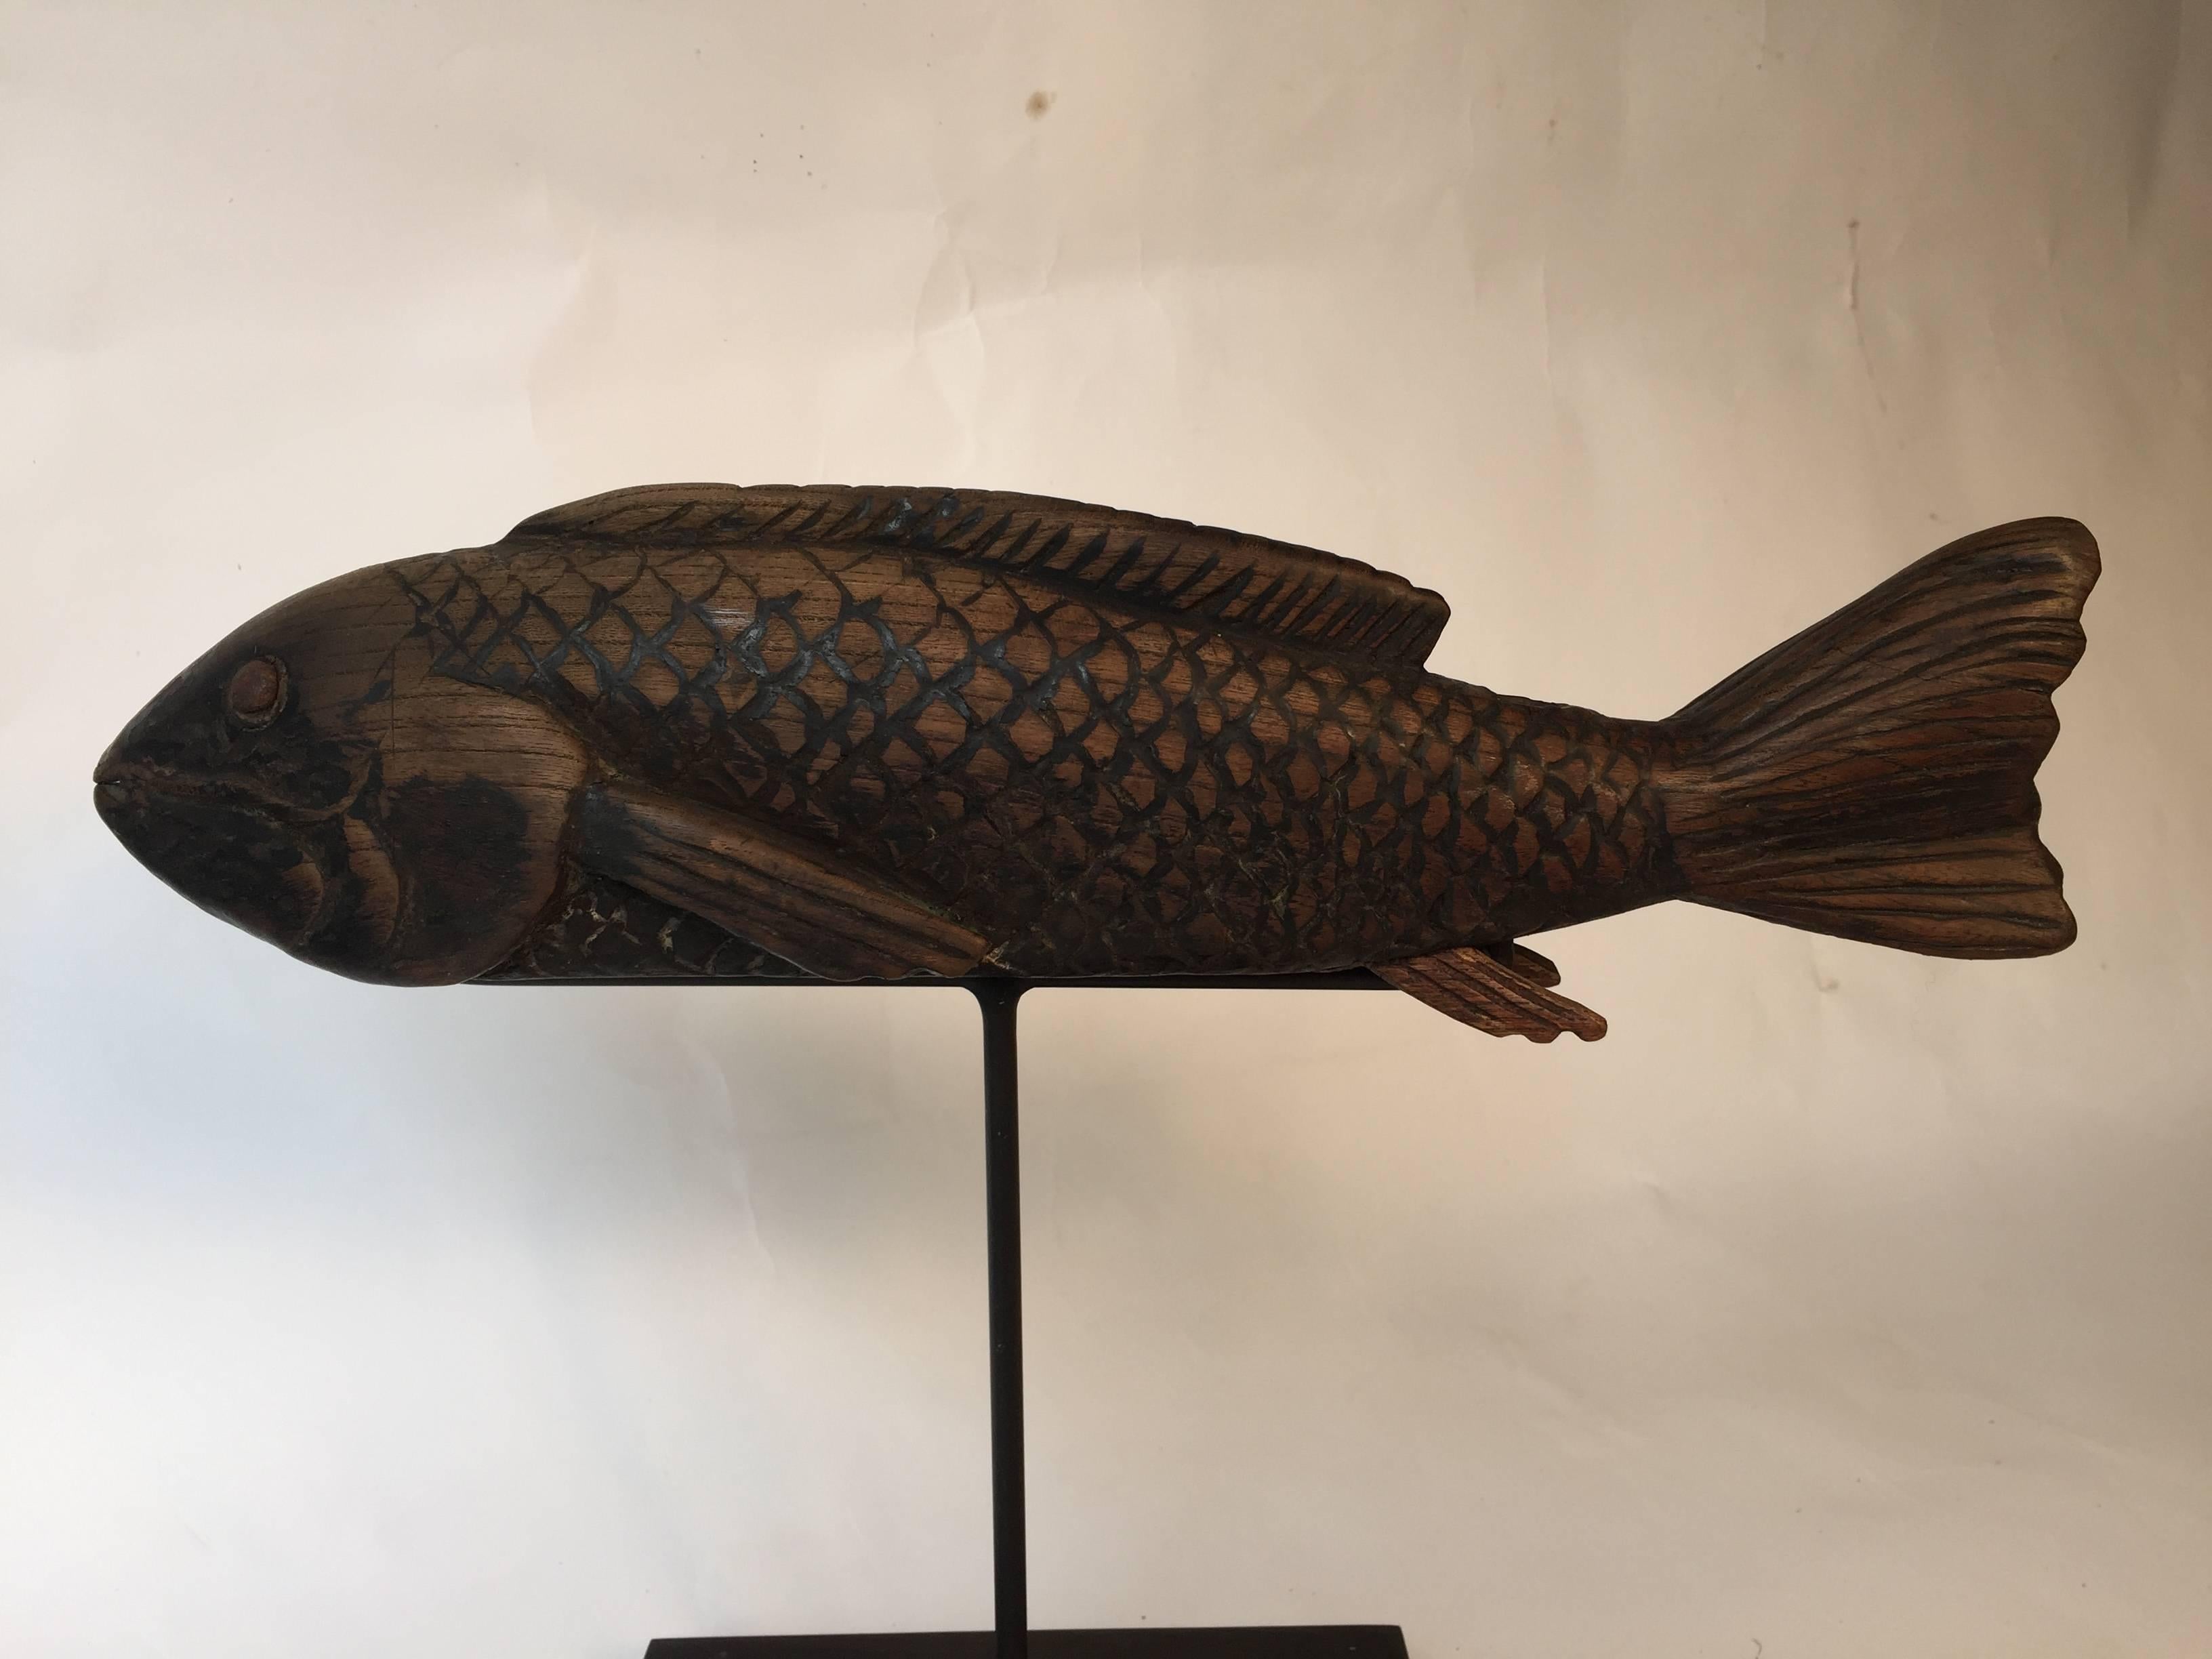 Meiji Japanese Hand-Carved Wood KOI Good Fortune Fish Sculpture, 19thc FREE SHIP